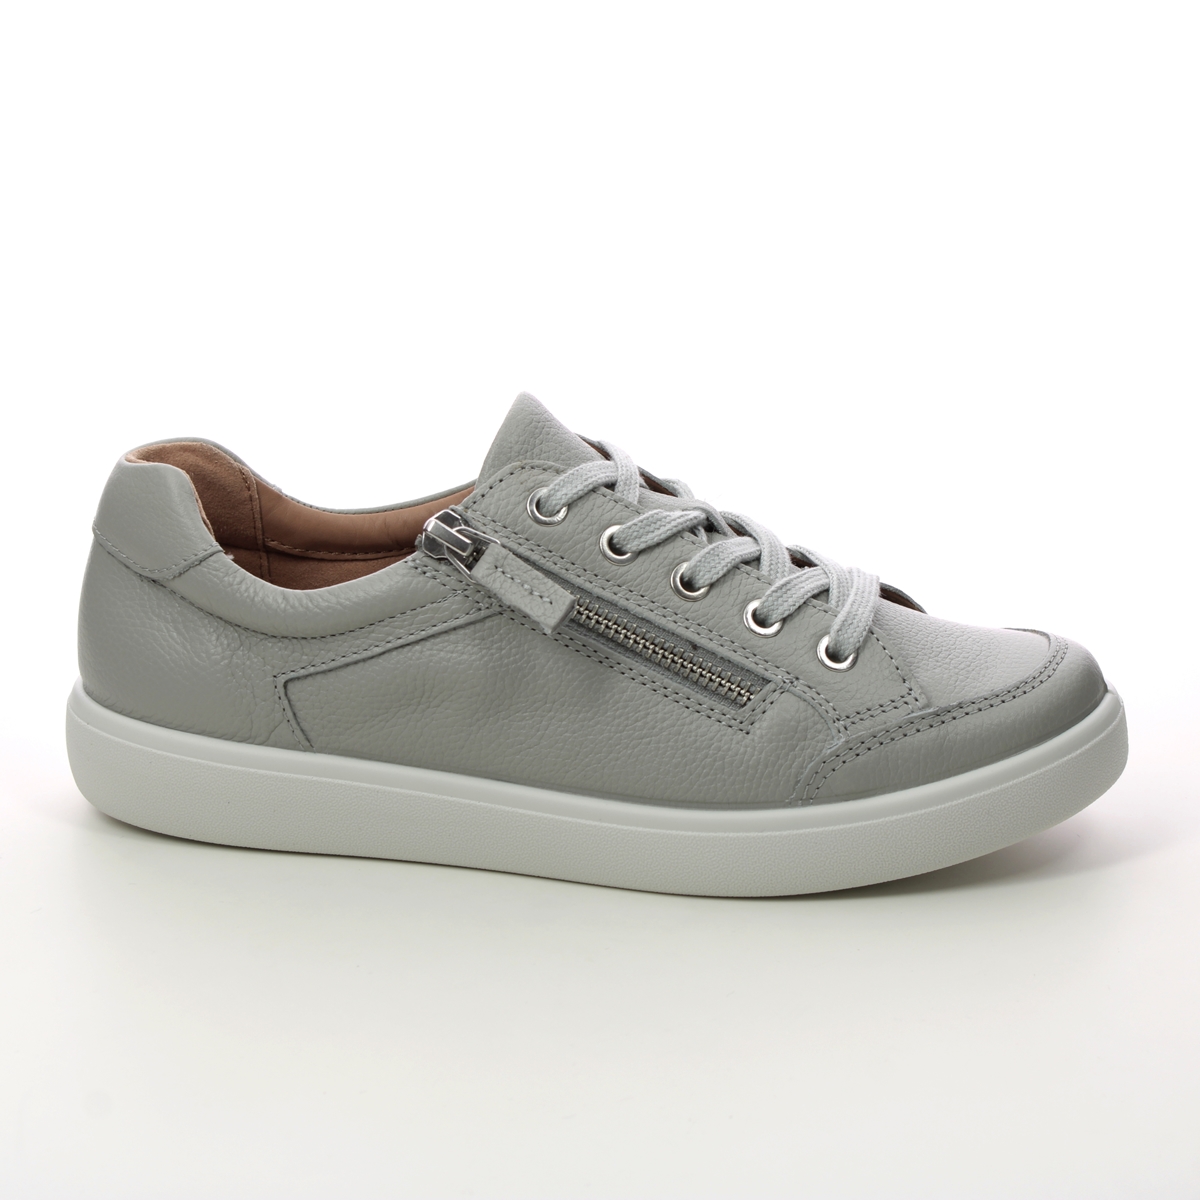 Hotter Chase 2 Wide 16116-03 Light Grey Leather trainers